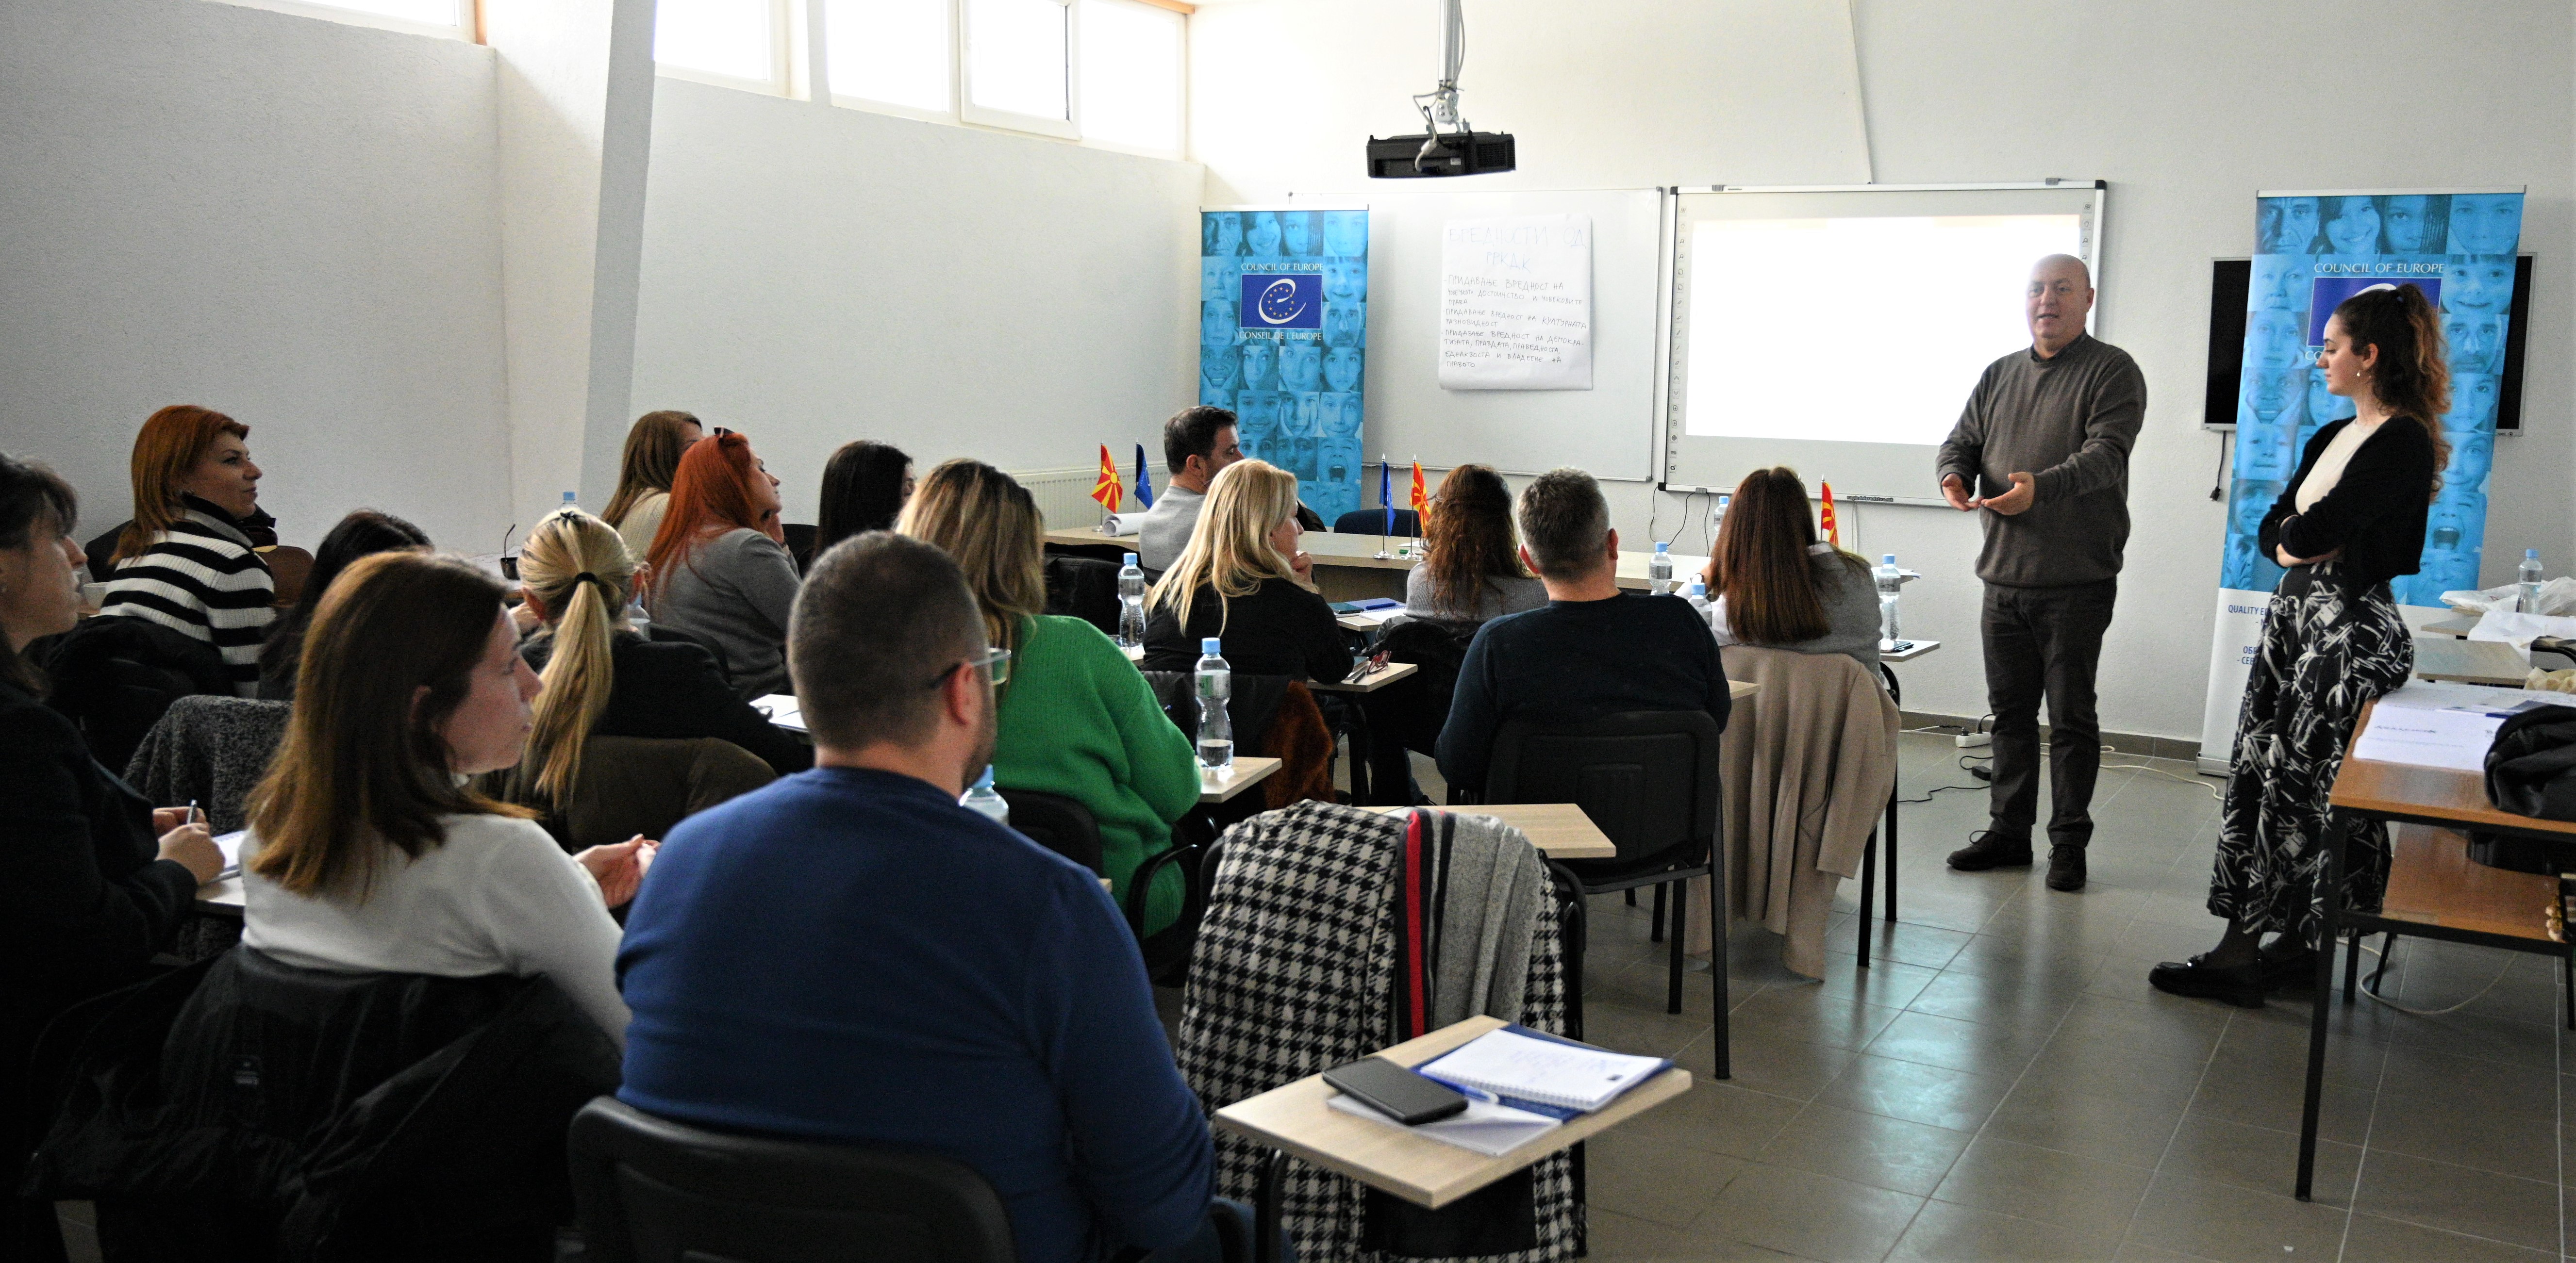 Quality Education for All - North Macedonia Launches First Training Module on Democratic Culture